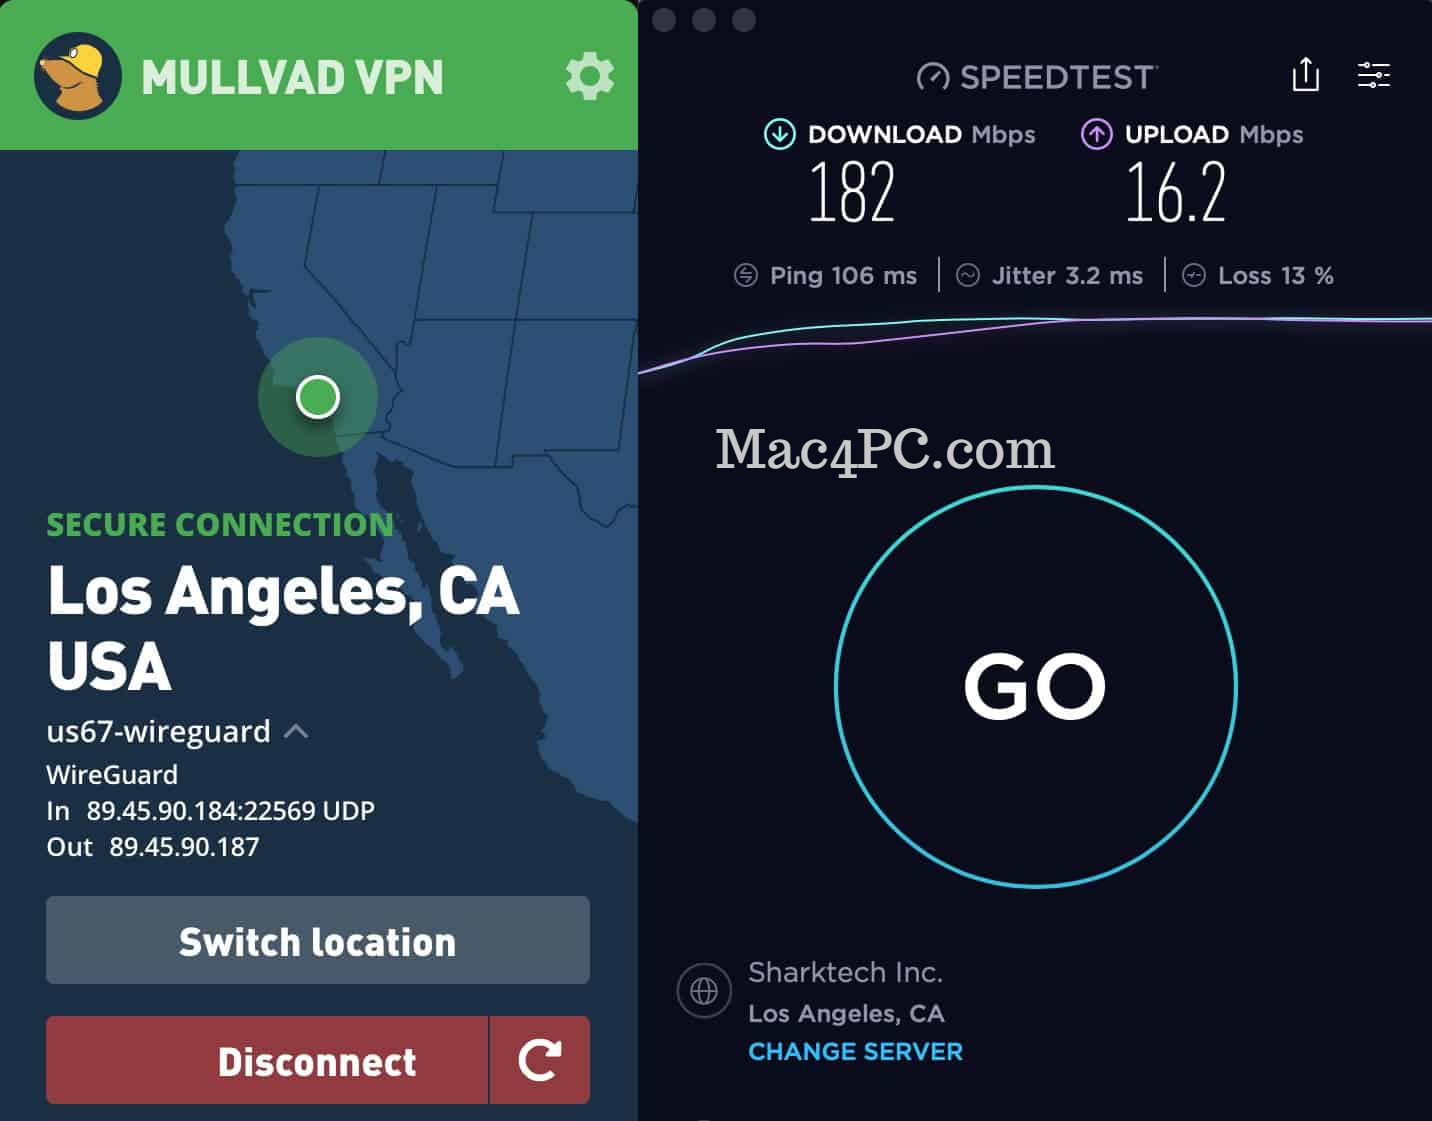 Mullvad VPN 2021.11 Crack For macOS With Activation Key Full Free Download